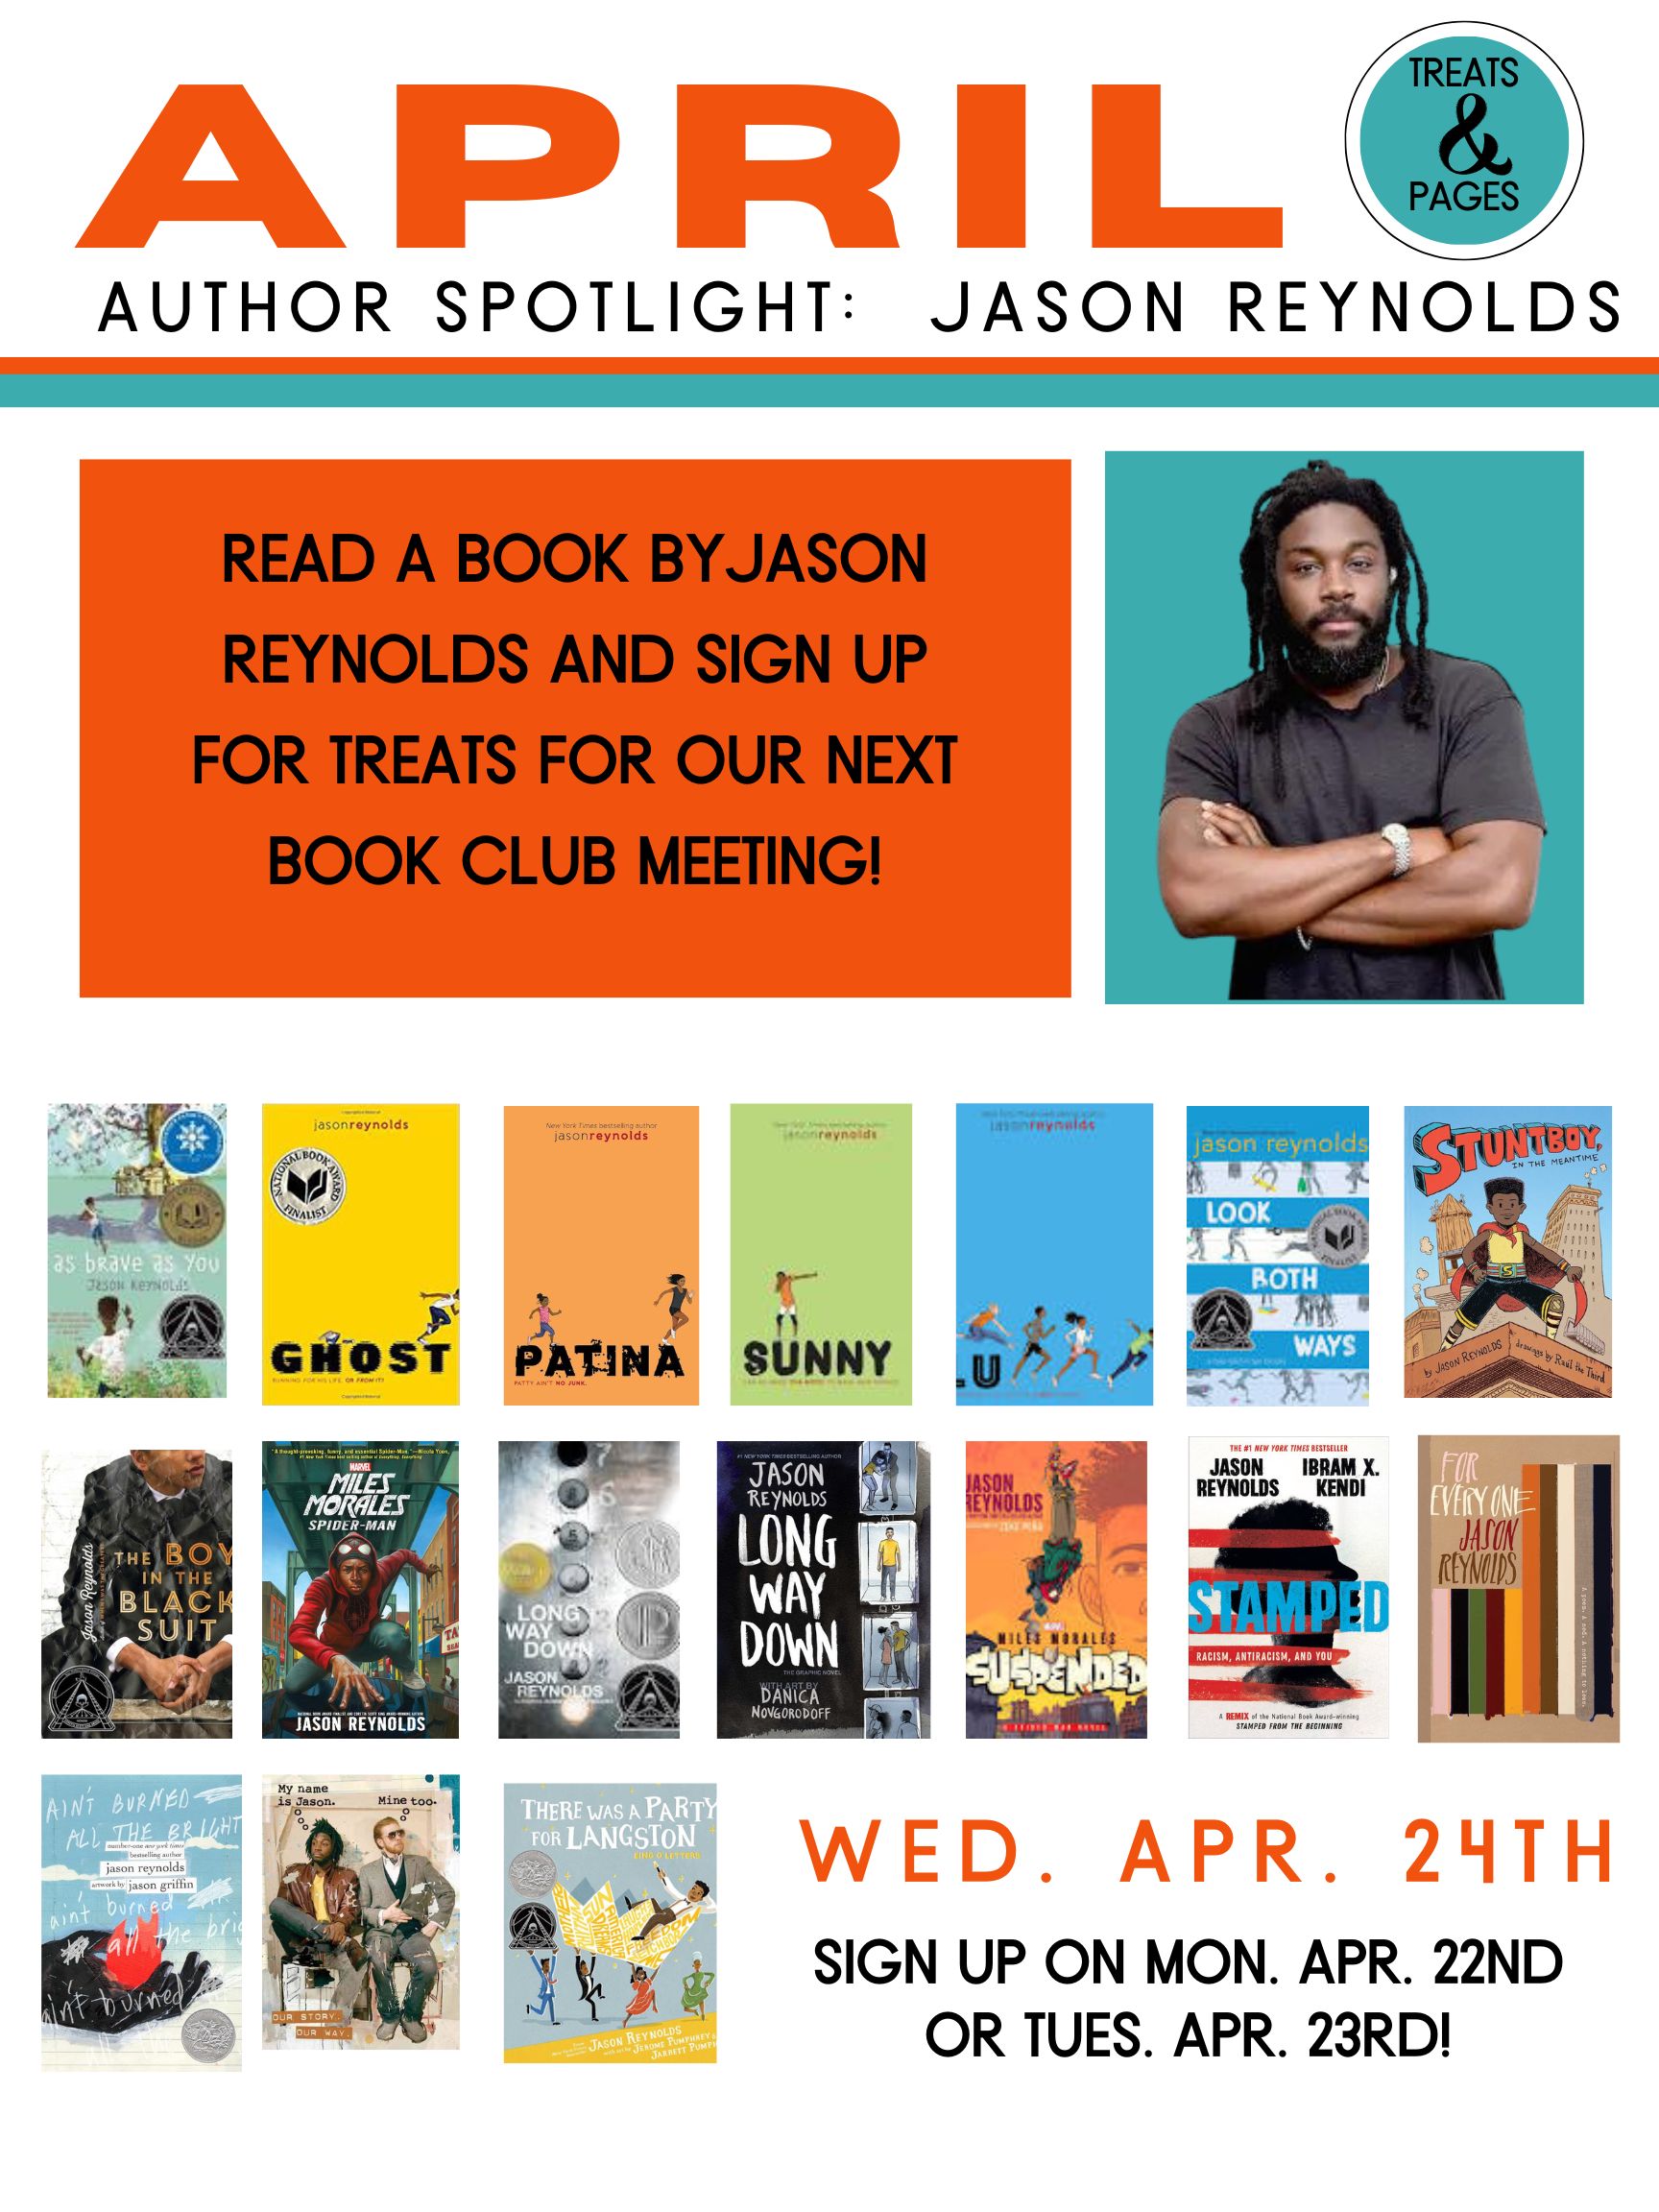 image of author Jason Reynolds and the books he has written